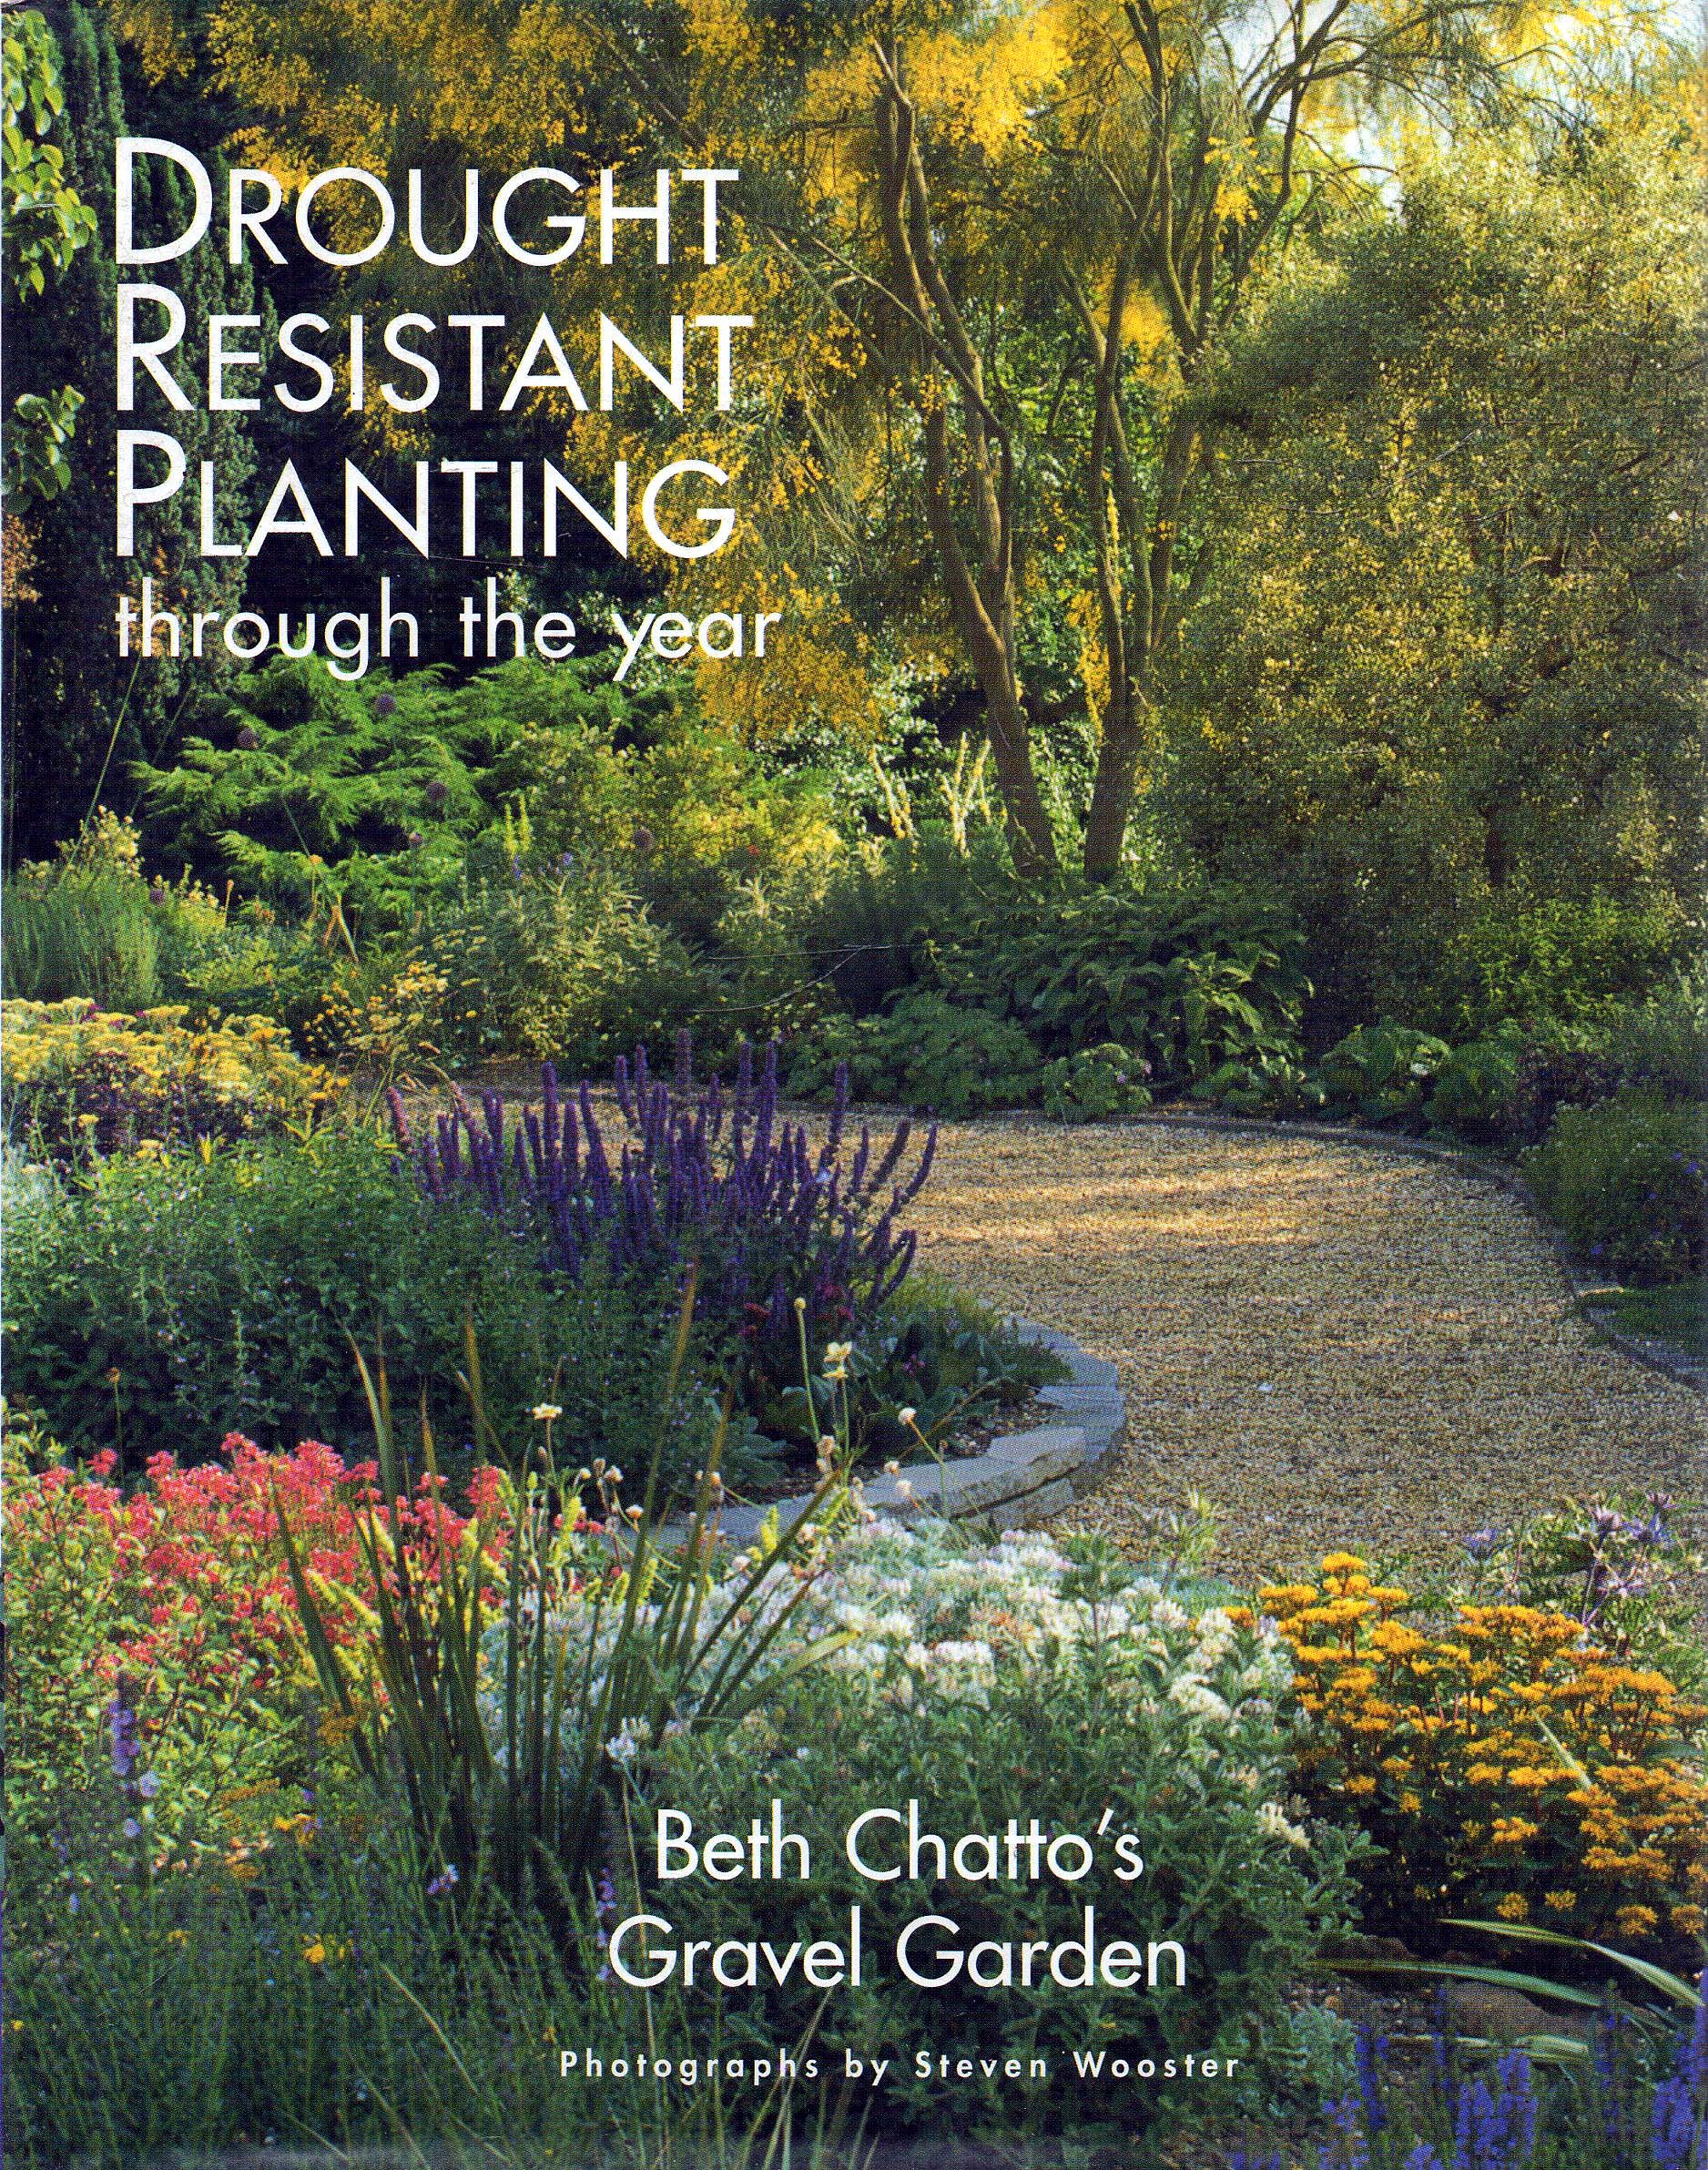 Beth Chatto's Gravel Garden: Drought Resistant Planting Through the Year - Chatto, Beth (photos. Steven Wooster)